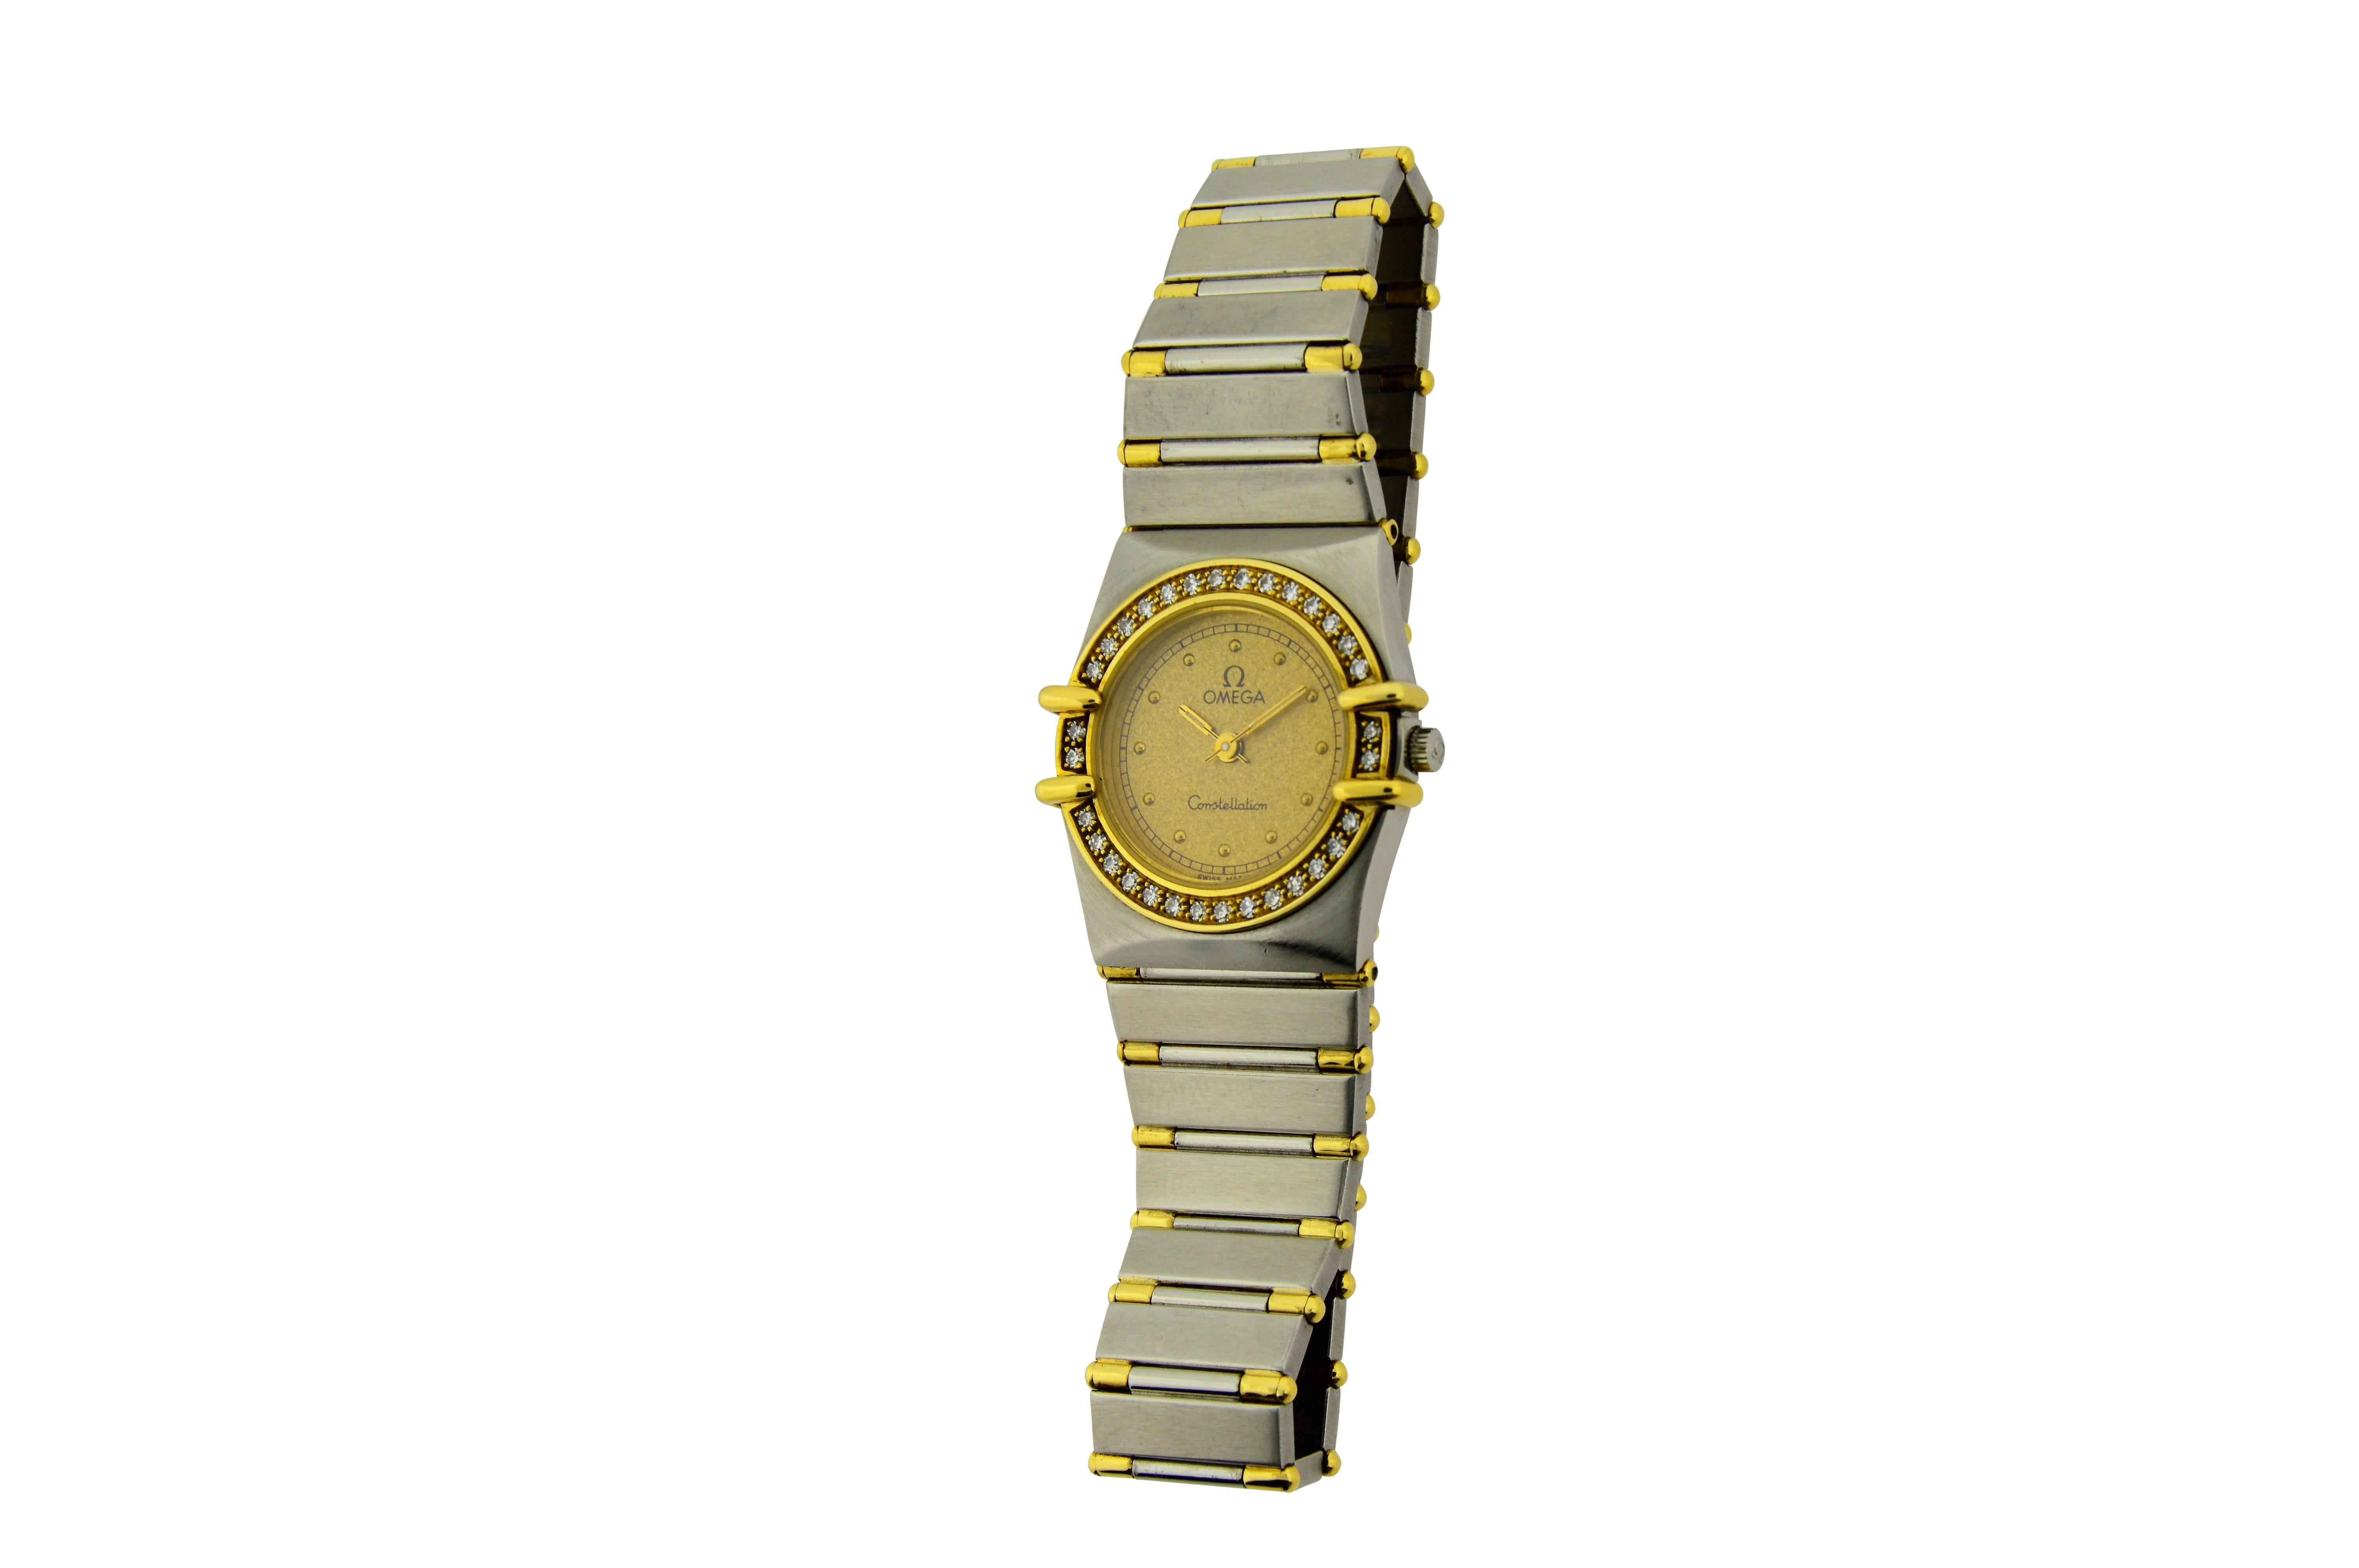 FACTORY / HOUSE: Omega Watch Company
STYLE / REFERENCE: Dress Model / Ref. 7950876
METAL / MATERIAL: Stainless Steel & 18Kt. Yellow Gold
DIMENSIONS:  25mm  X  24mm
CIRCA: 1990's
MOVEMENT / CALIBER: Quartz / Jeweled / Cal. 1455
DIAL / HANDS: Original